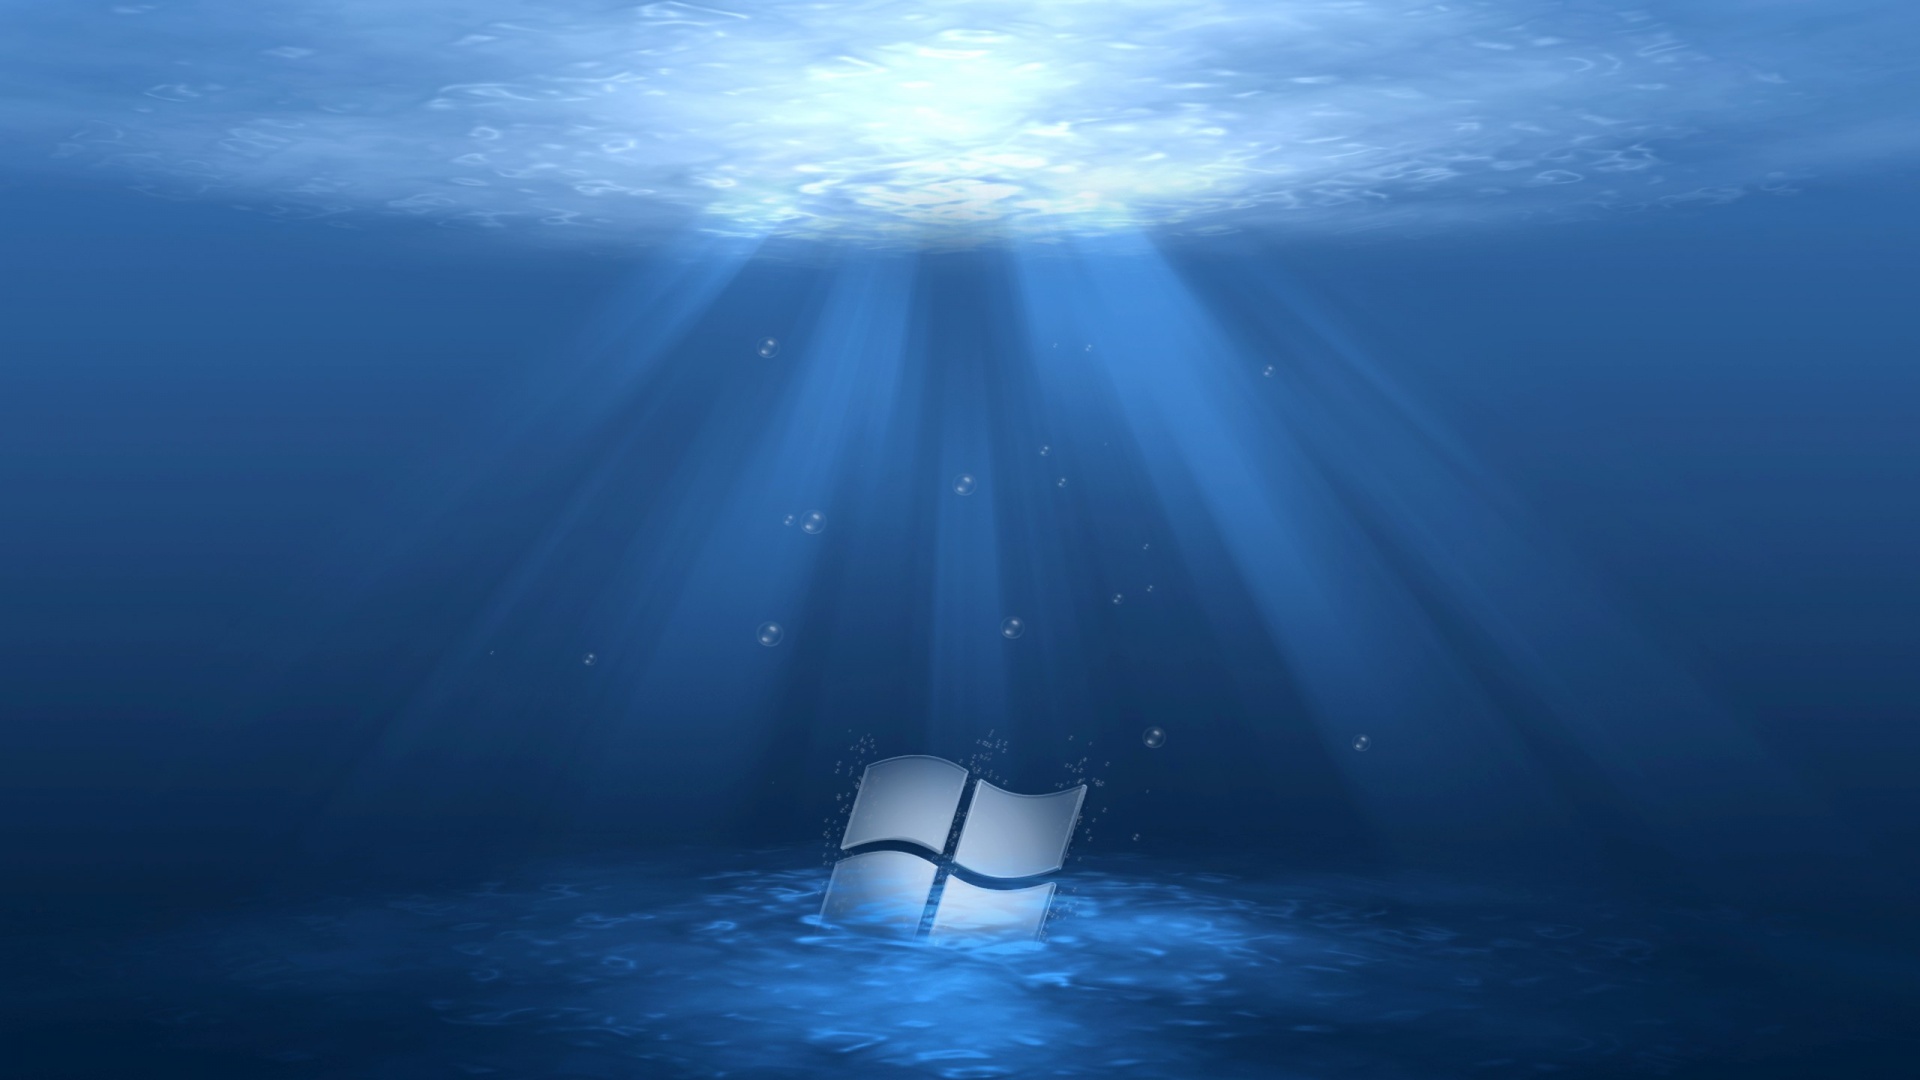 Windows Home Server 2011, underwater, 1920x1080 HD Wallpaper and other